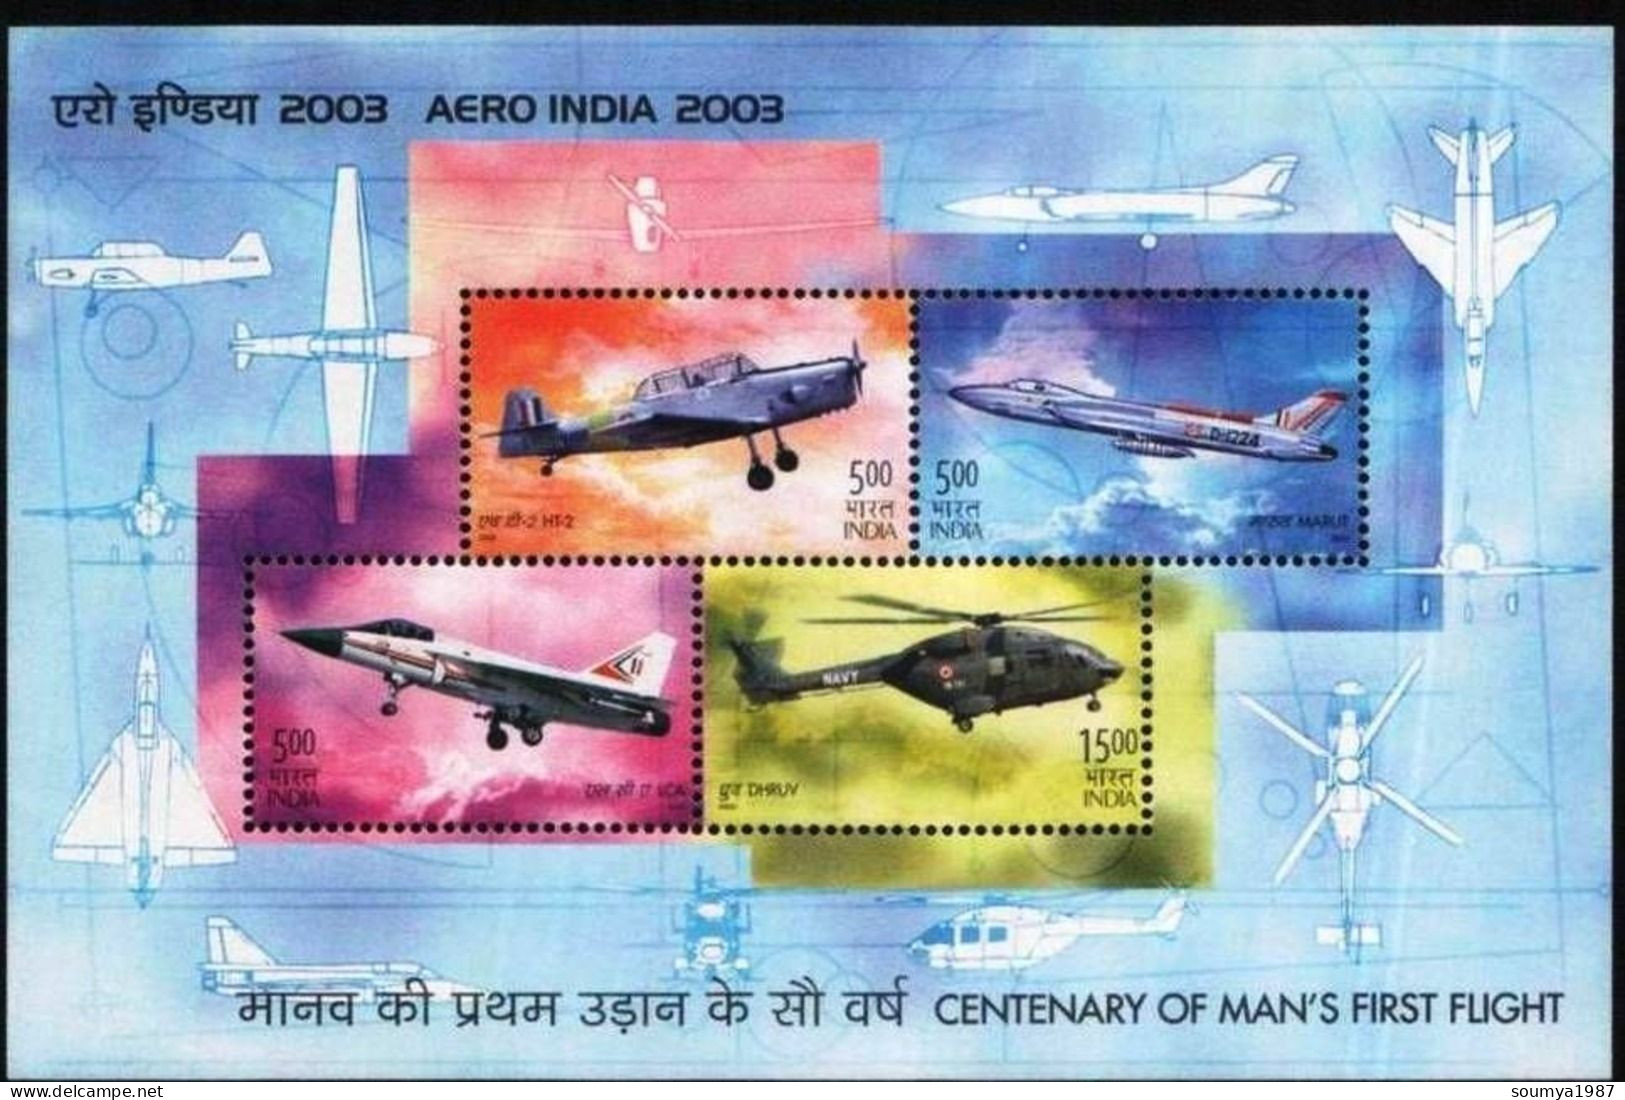 INDIA 2003 AERO INDIA CENTENARY OF MAN'S FIRST FLIGHT PLANES AIRCRAFT MINIATURE SHEET MS MNH - Unused Stamps